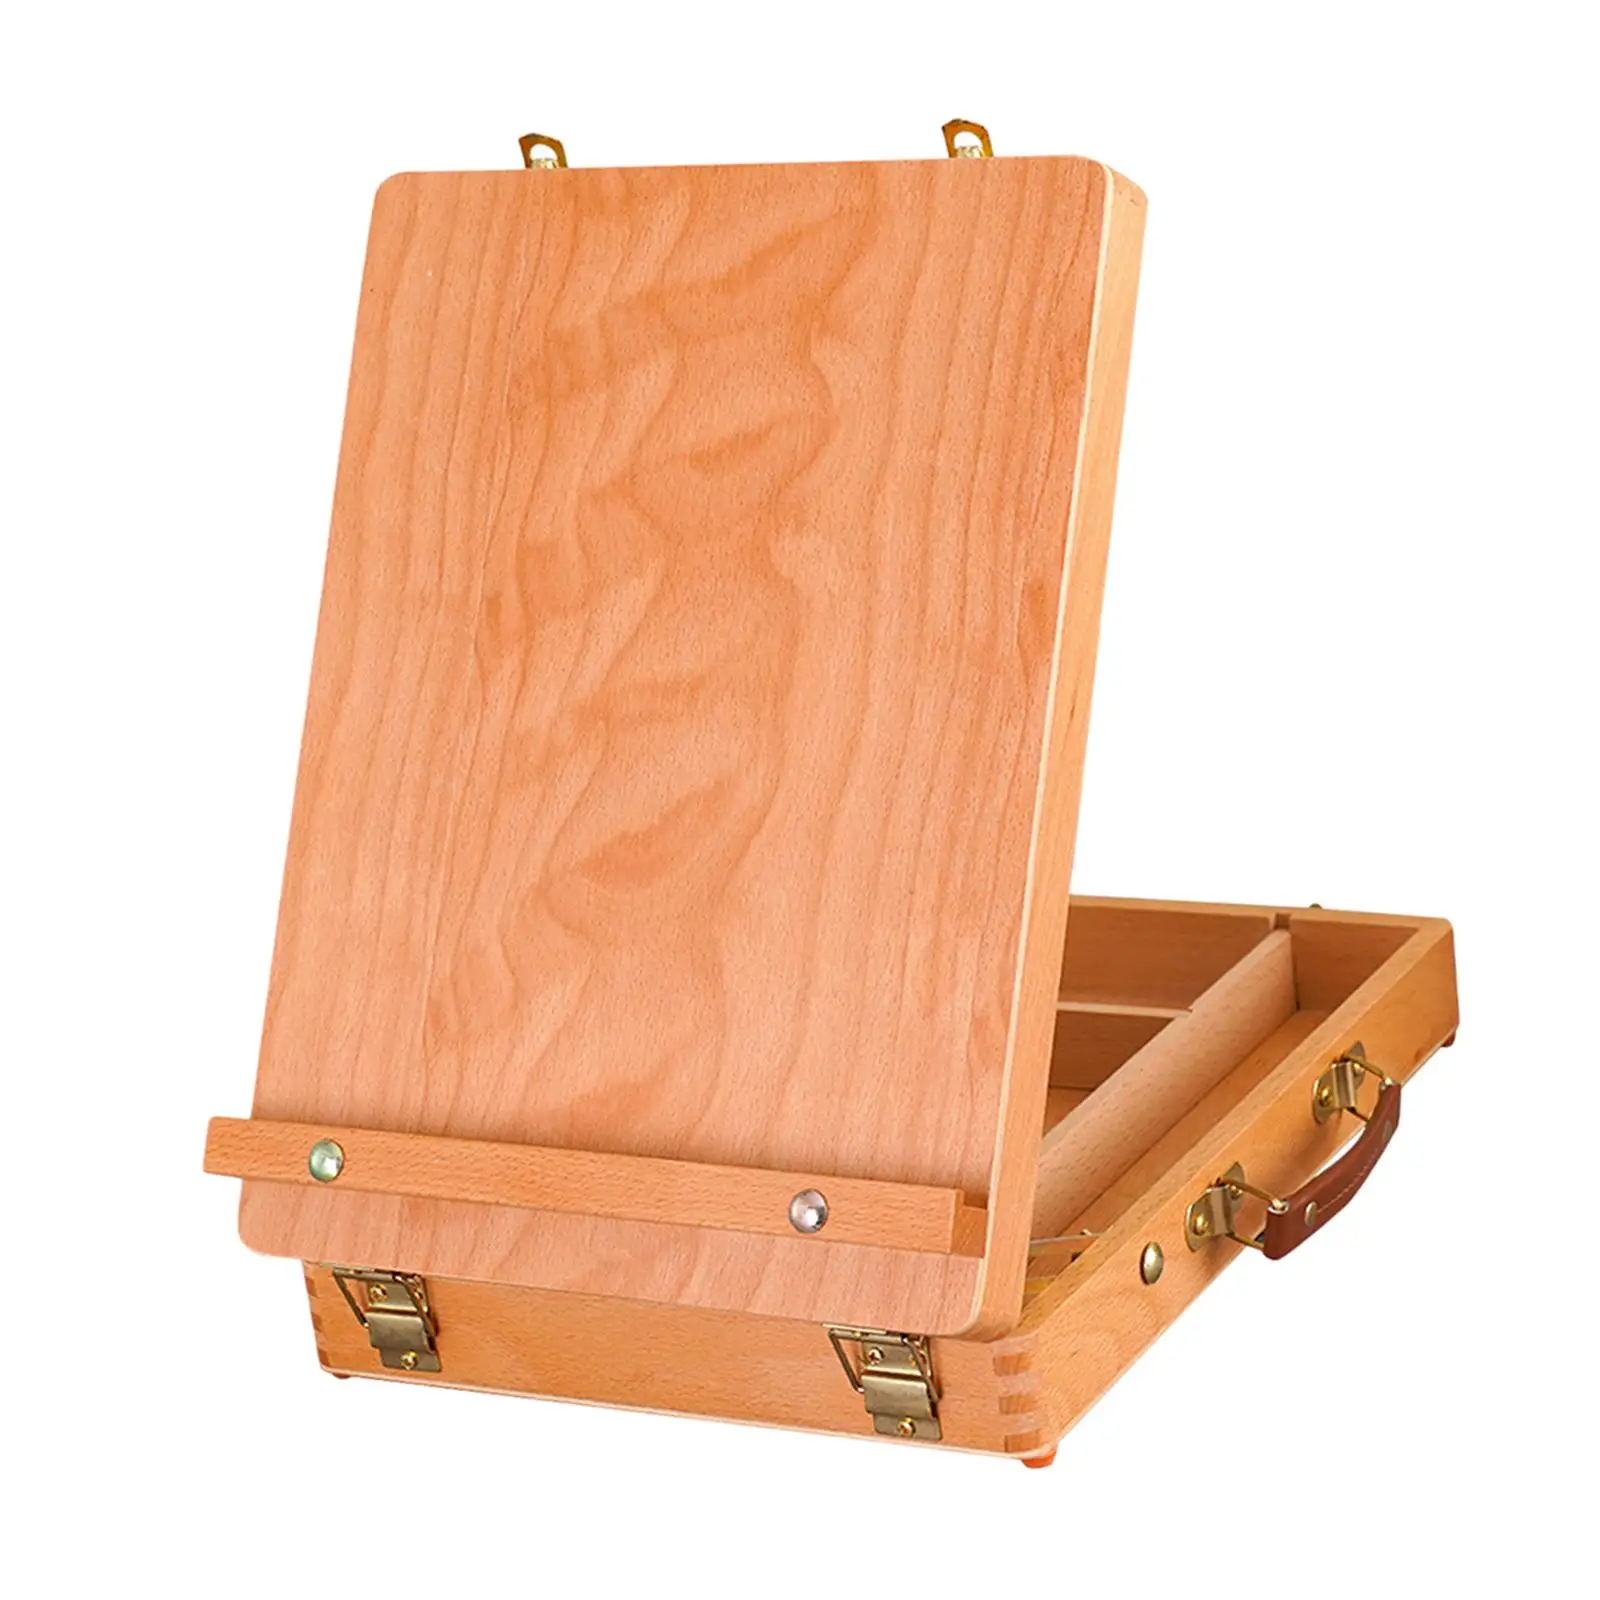 Adjustable Wood Table Easel Portable Wooden Artist Desktop Storage Case for Drawing Painting Art Supplies